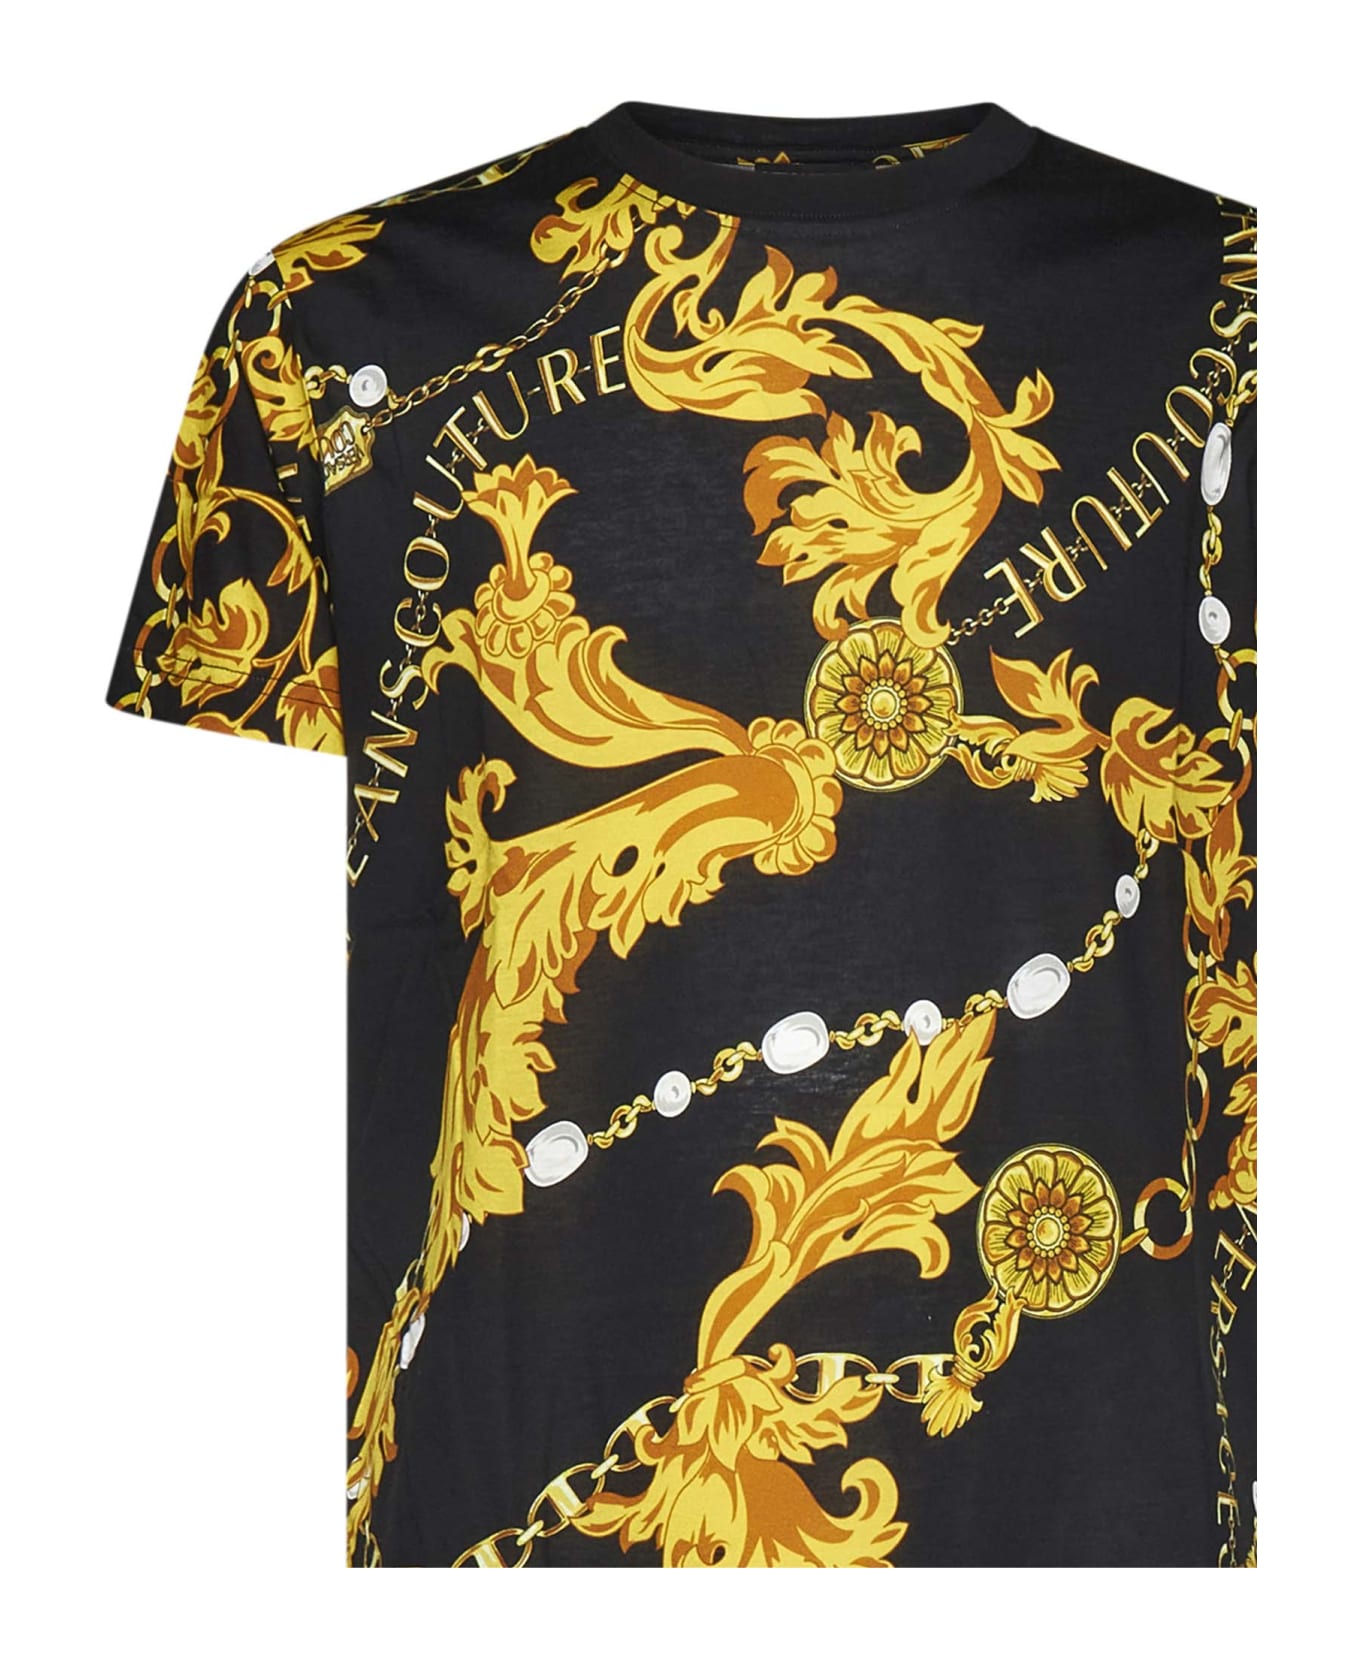 Versace Jeans Couture Chain Couture Print T-shirt - Black